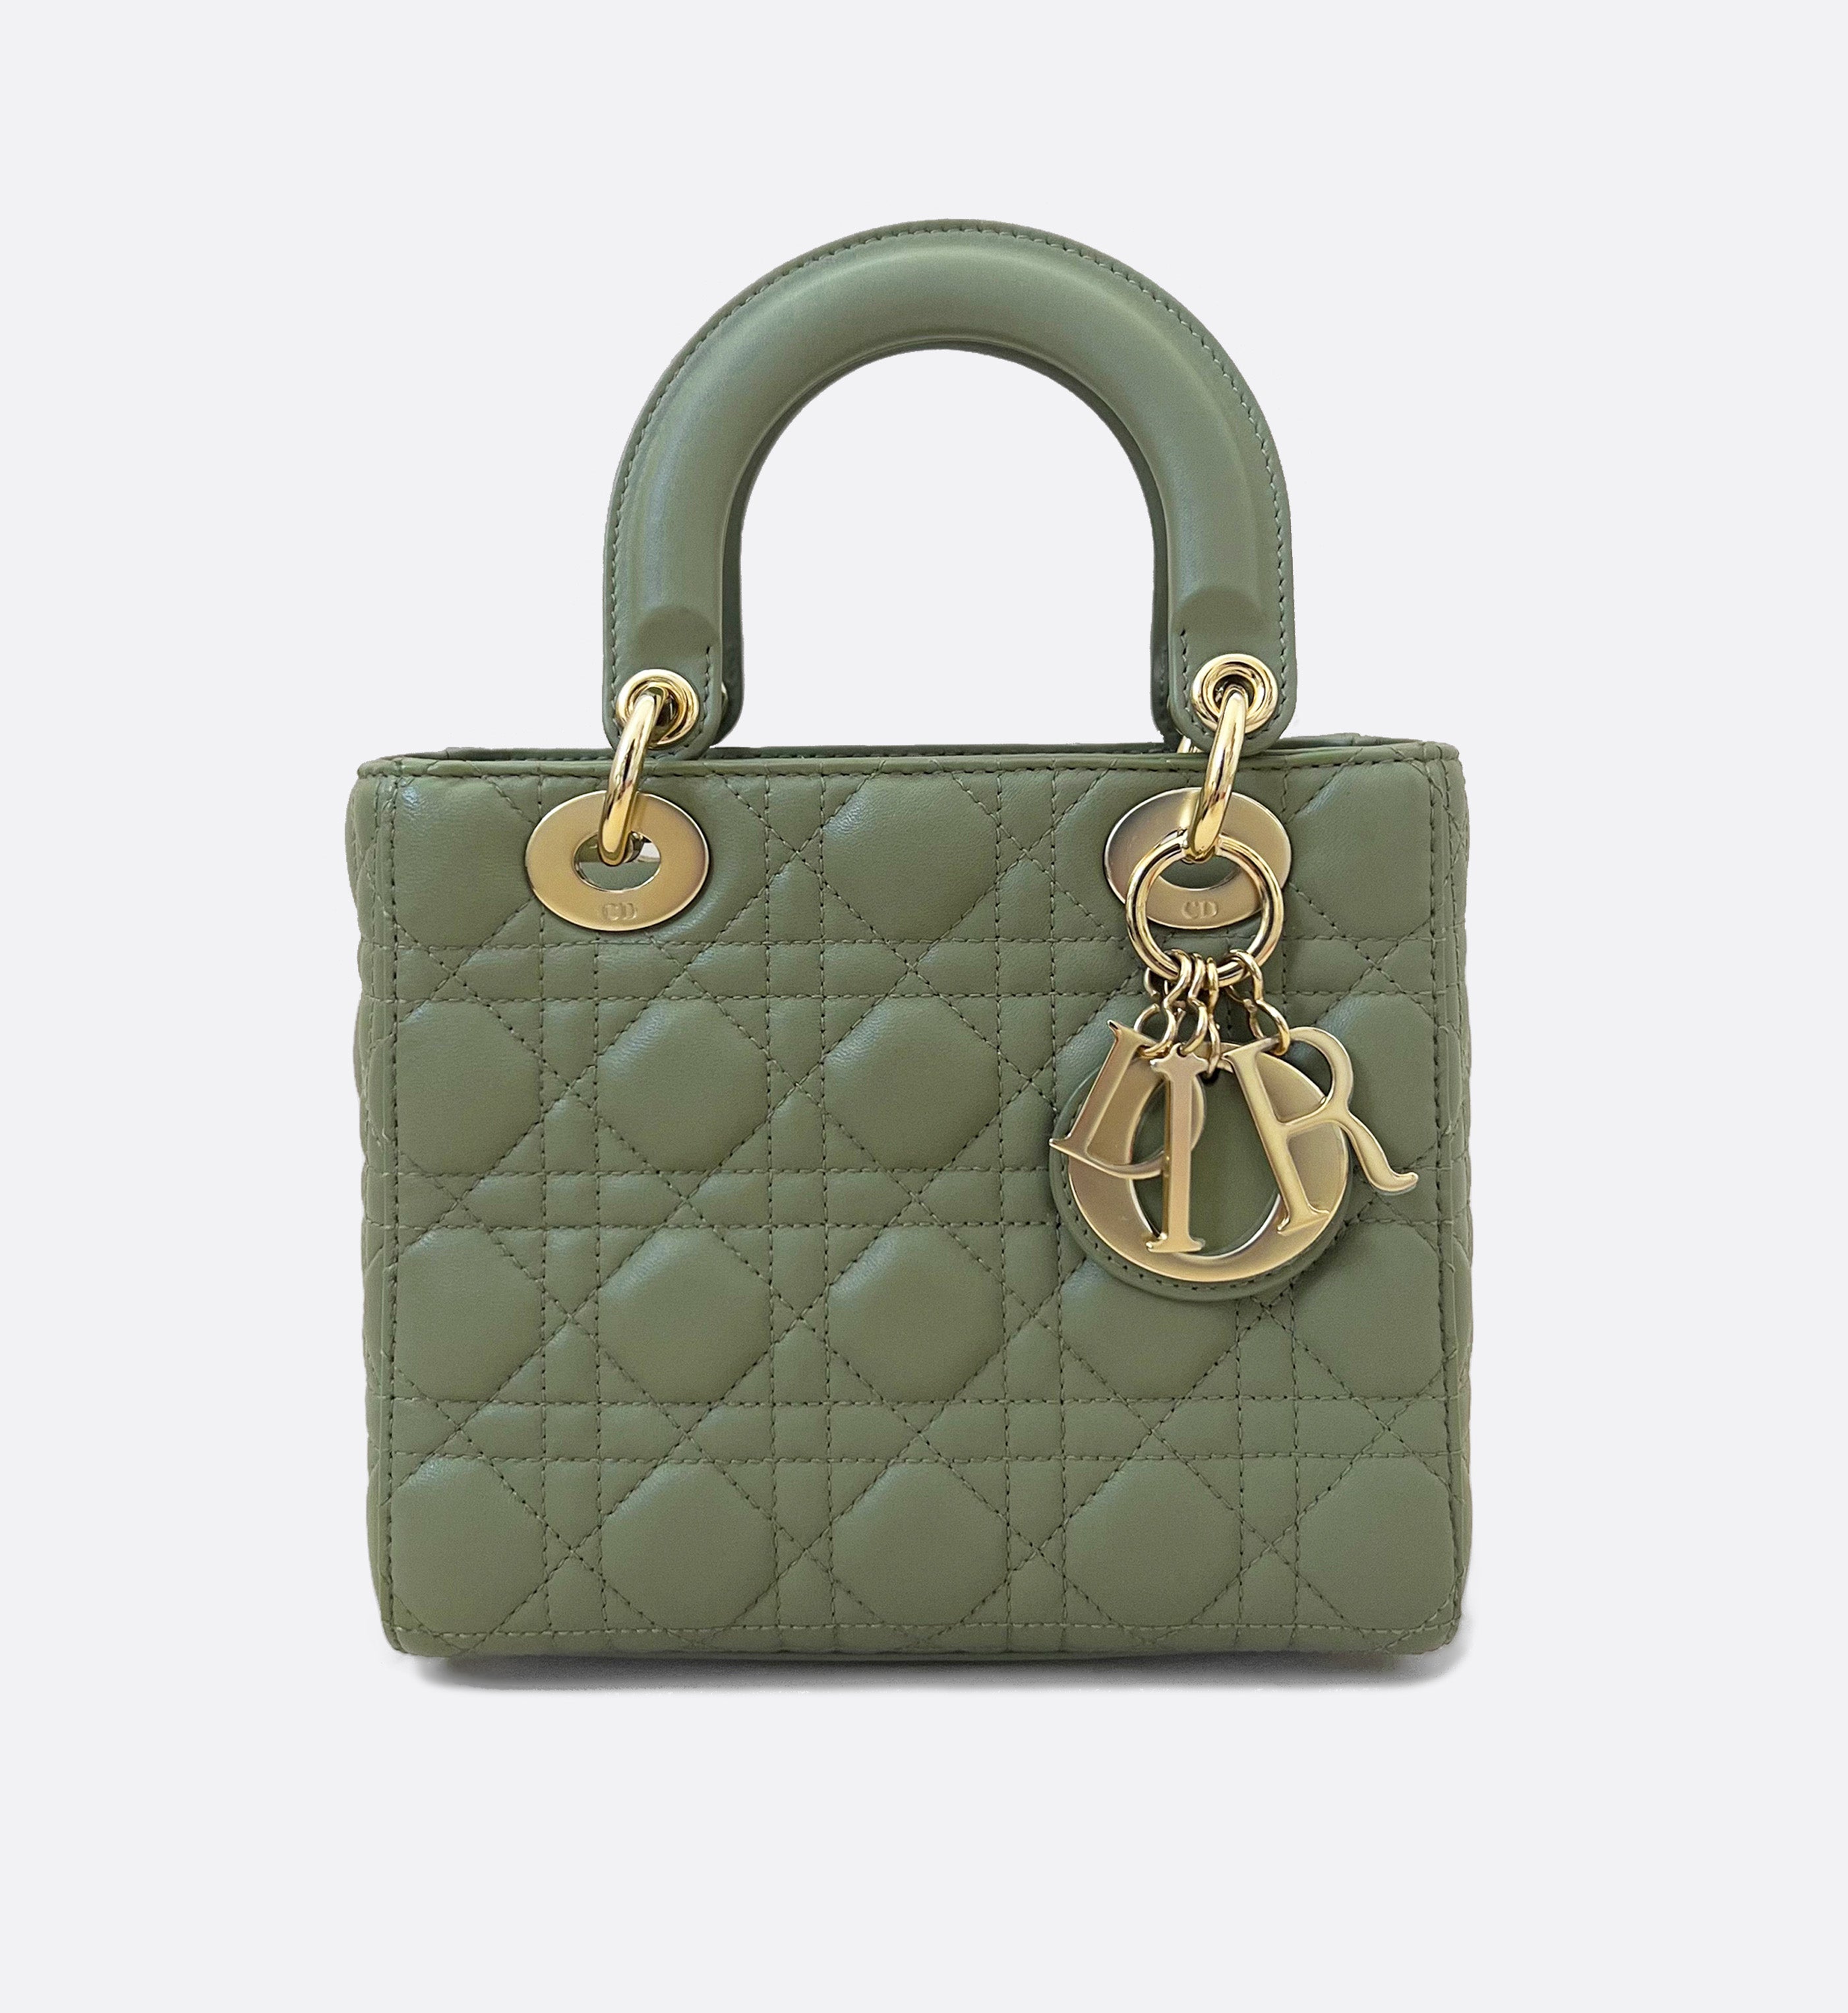 Lady Dior Small in Green Lambskin with GHW